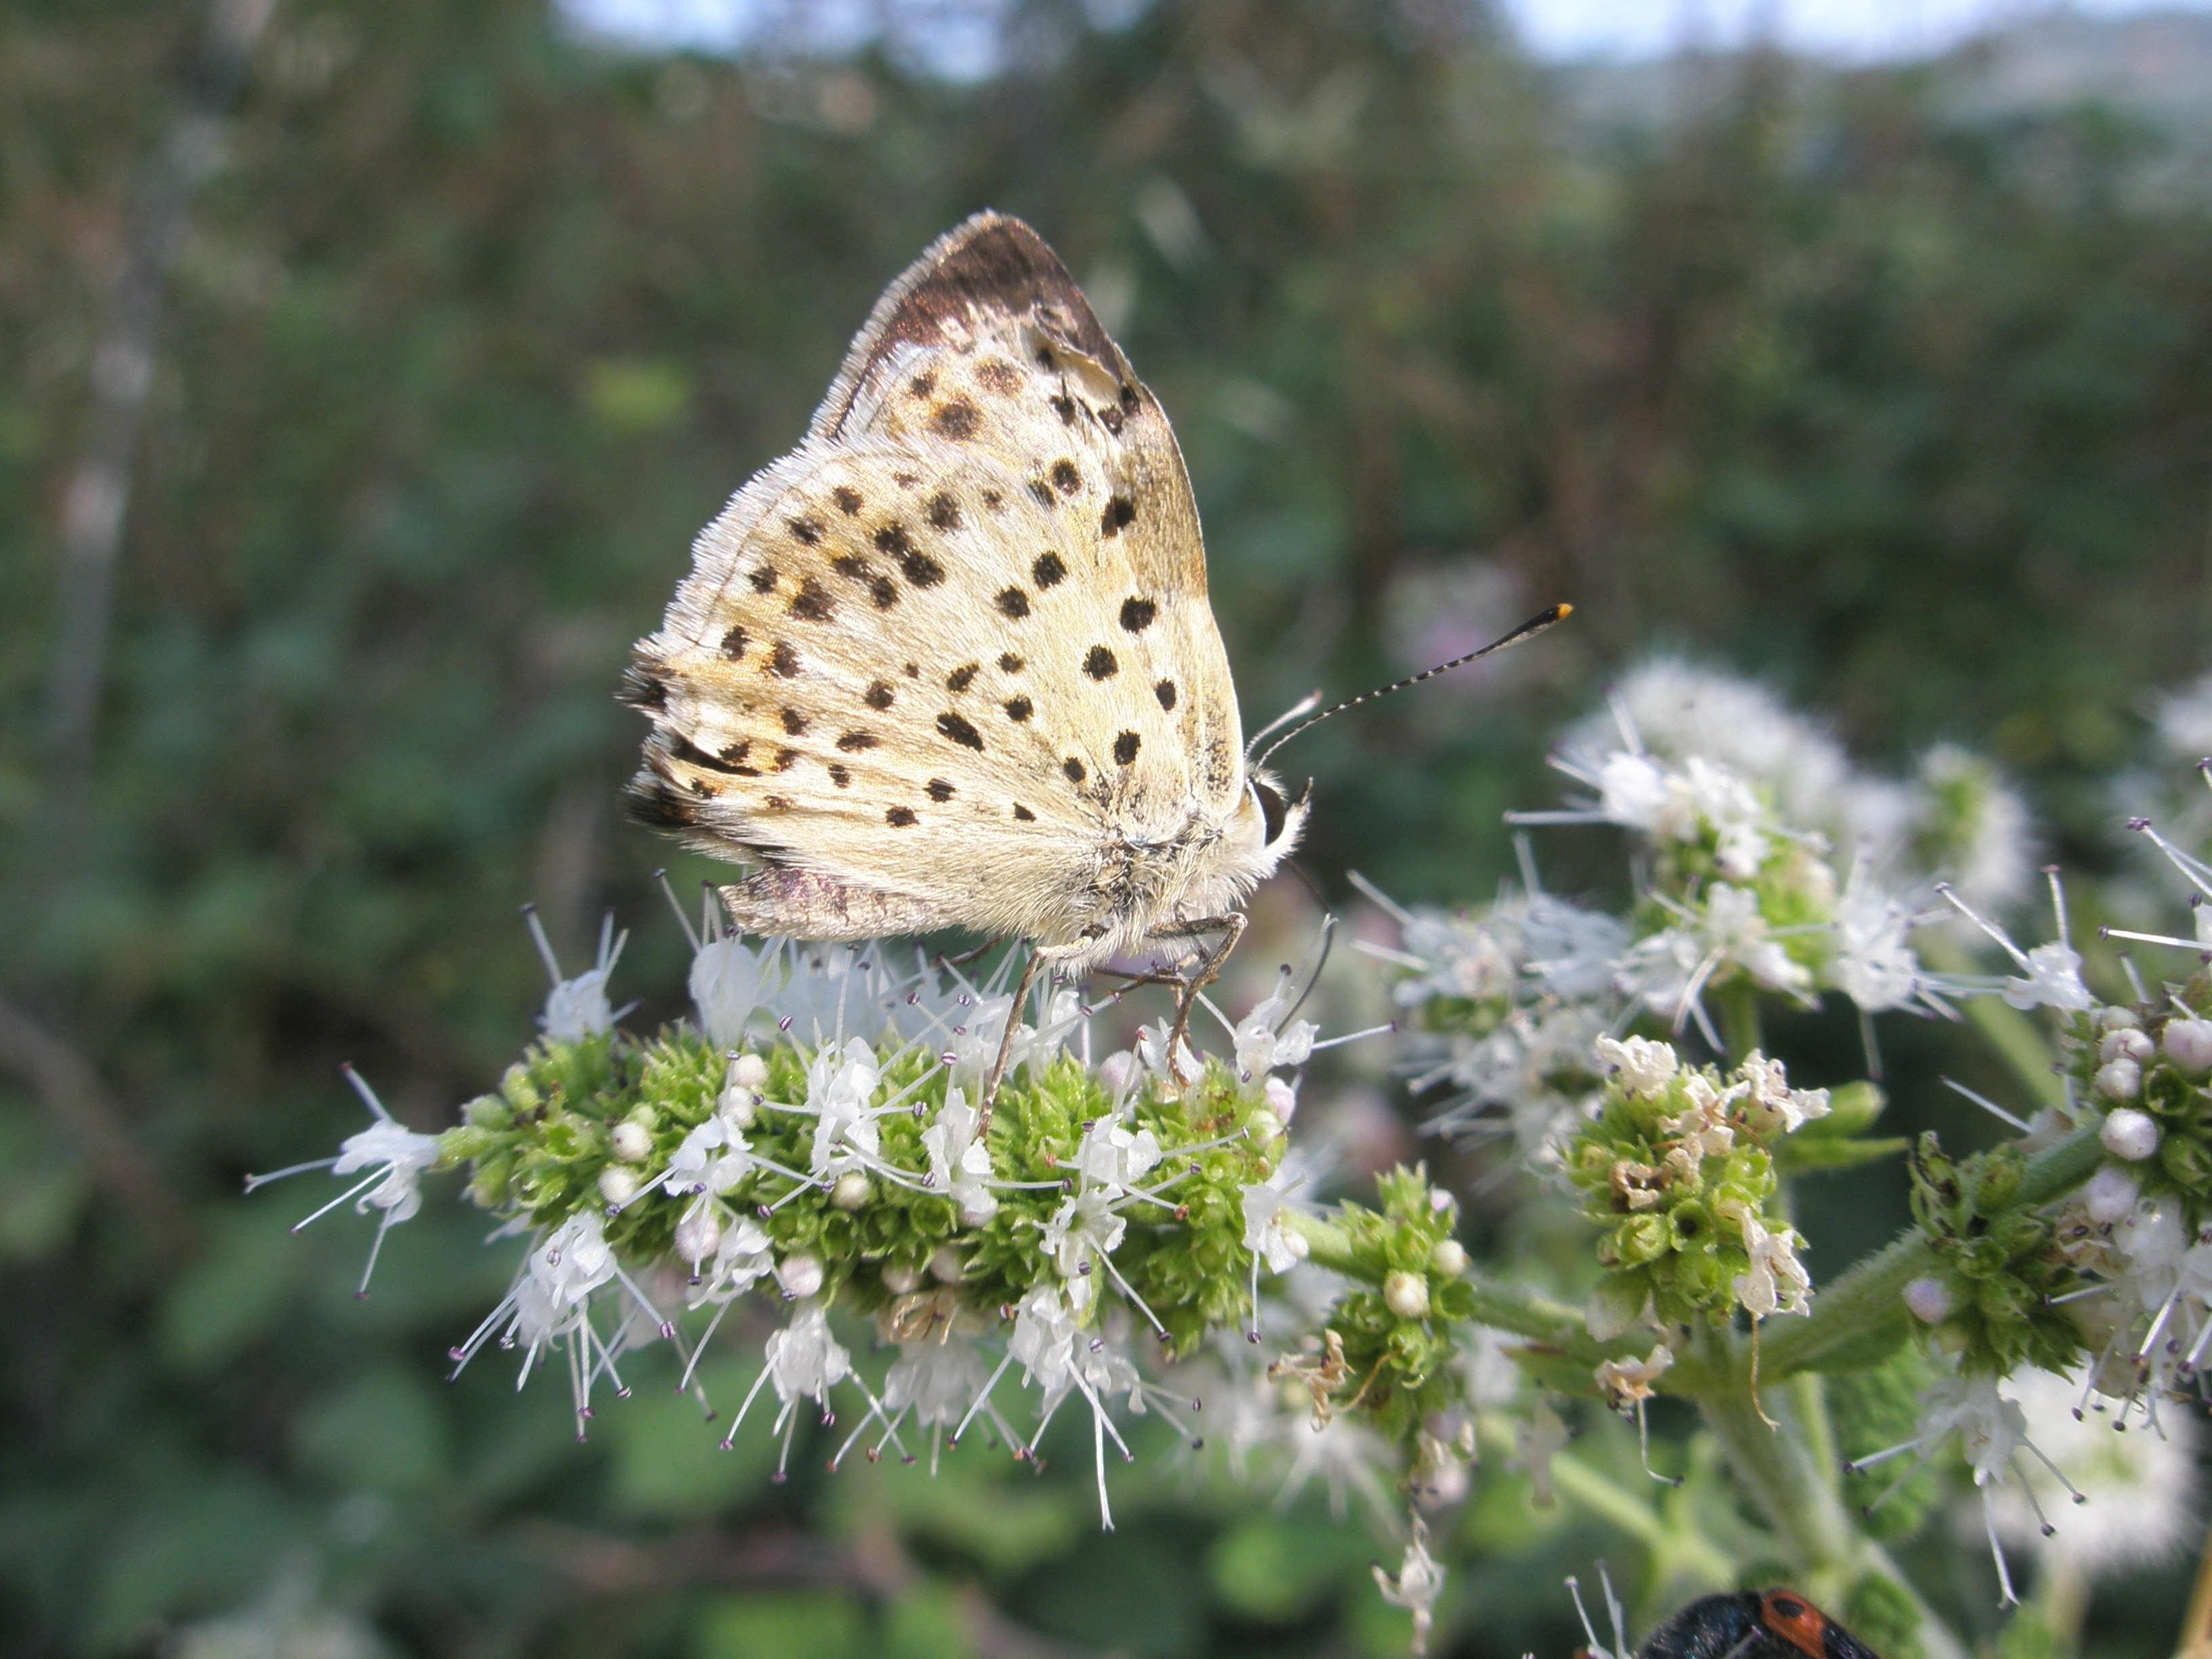 grey and black spotted butterfly on white flowers